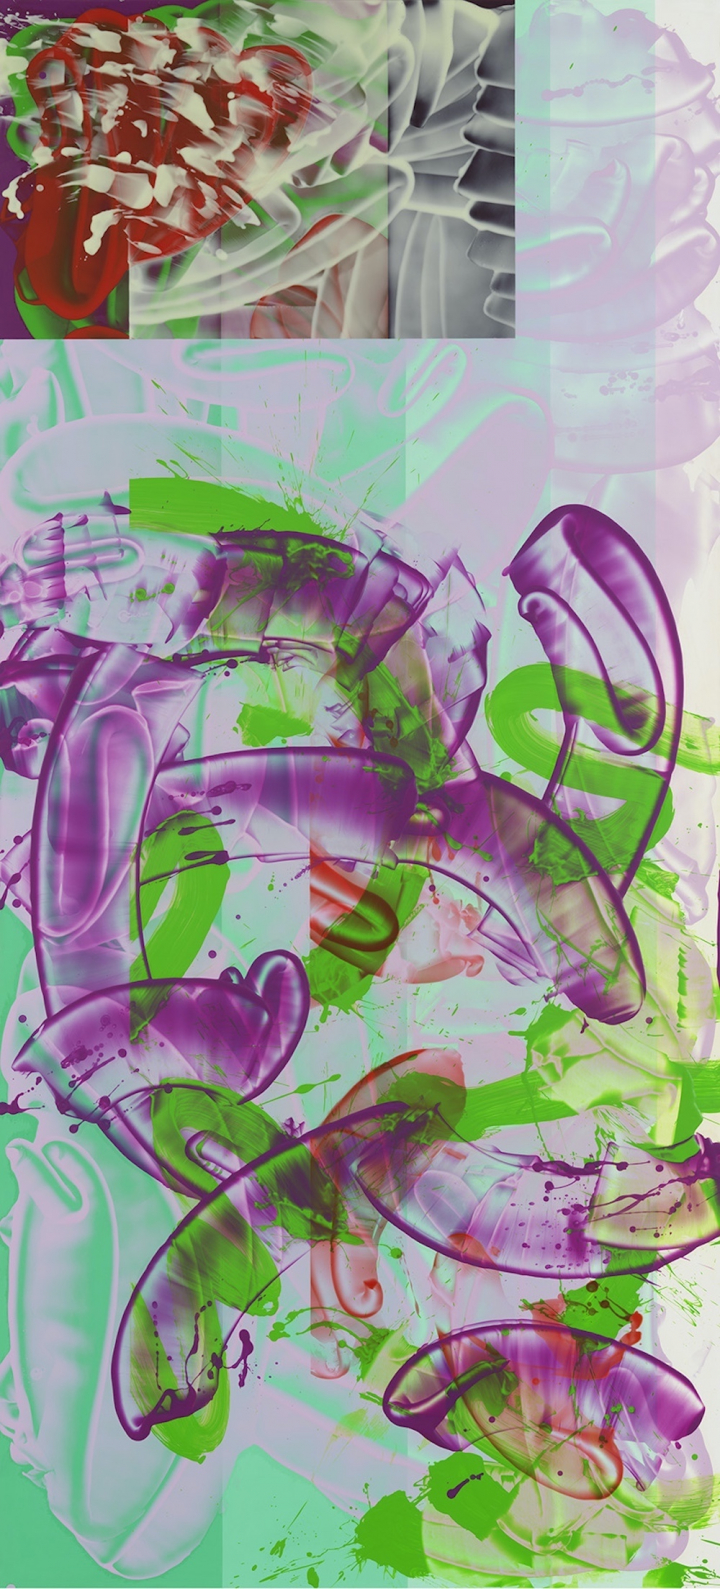 Abstract painting with purple, red, and green splatter in the for front and blue-turquoise in the left background